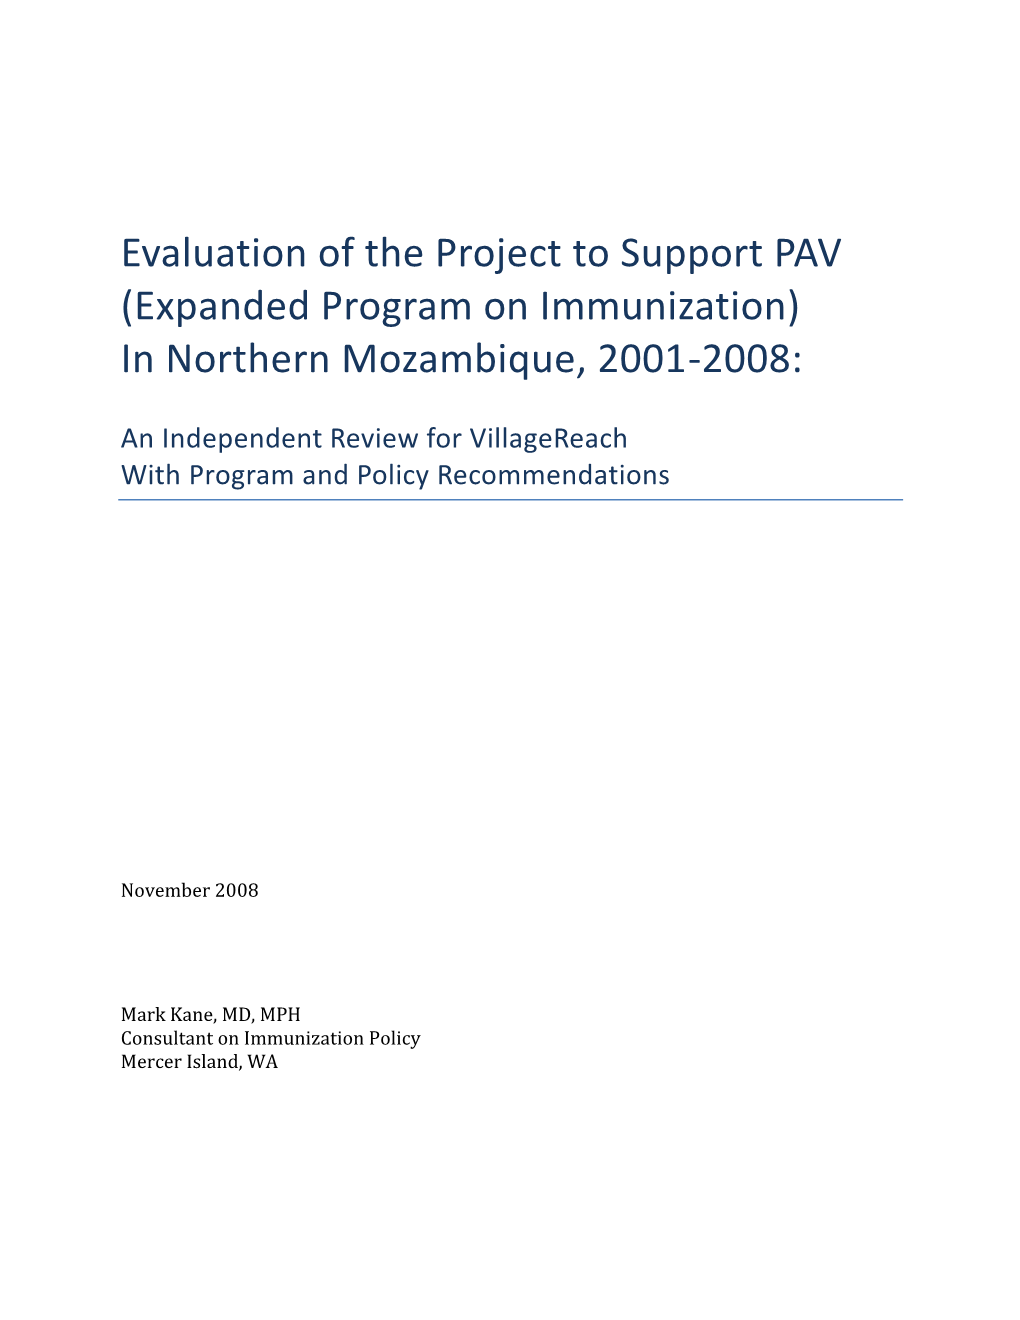 Evaluation of the Project to Support PAV (Expanded Program on Immunization) in Northern Mozambique, 2001-2008